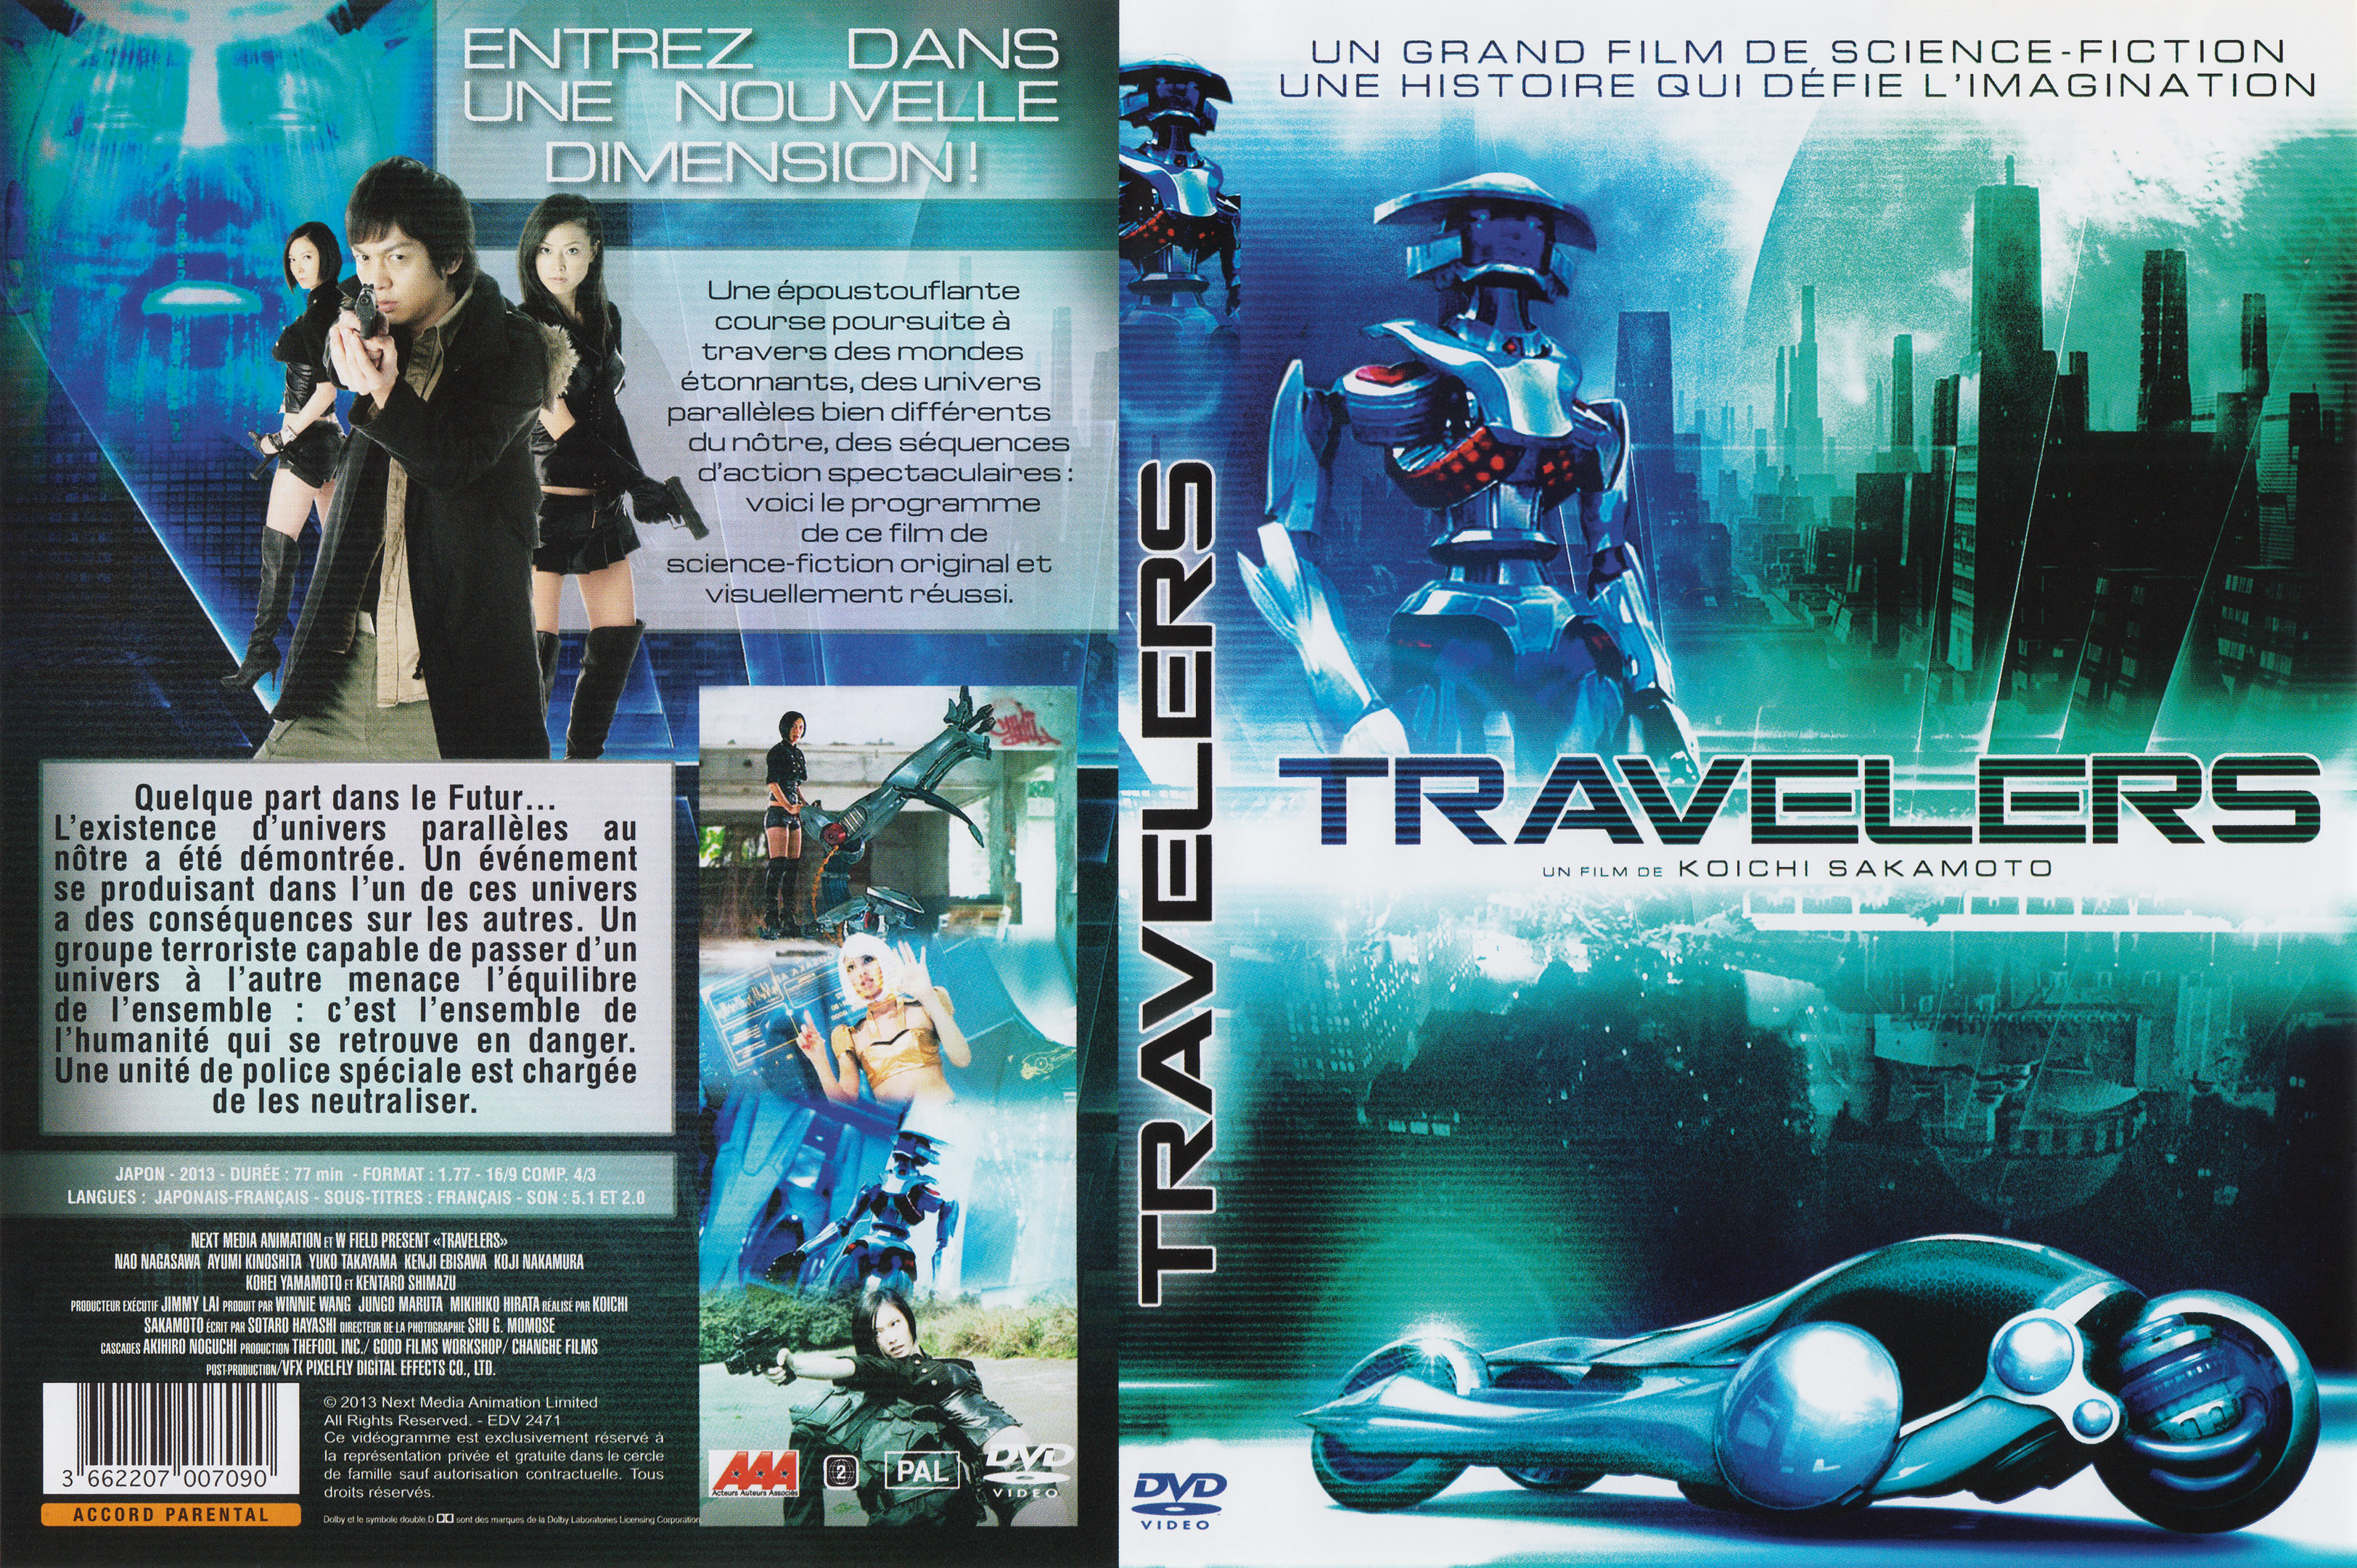 Jaquette DVD Travelers